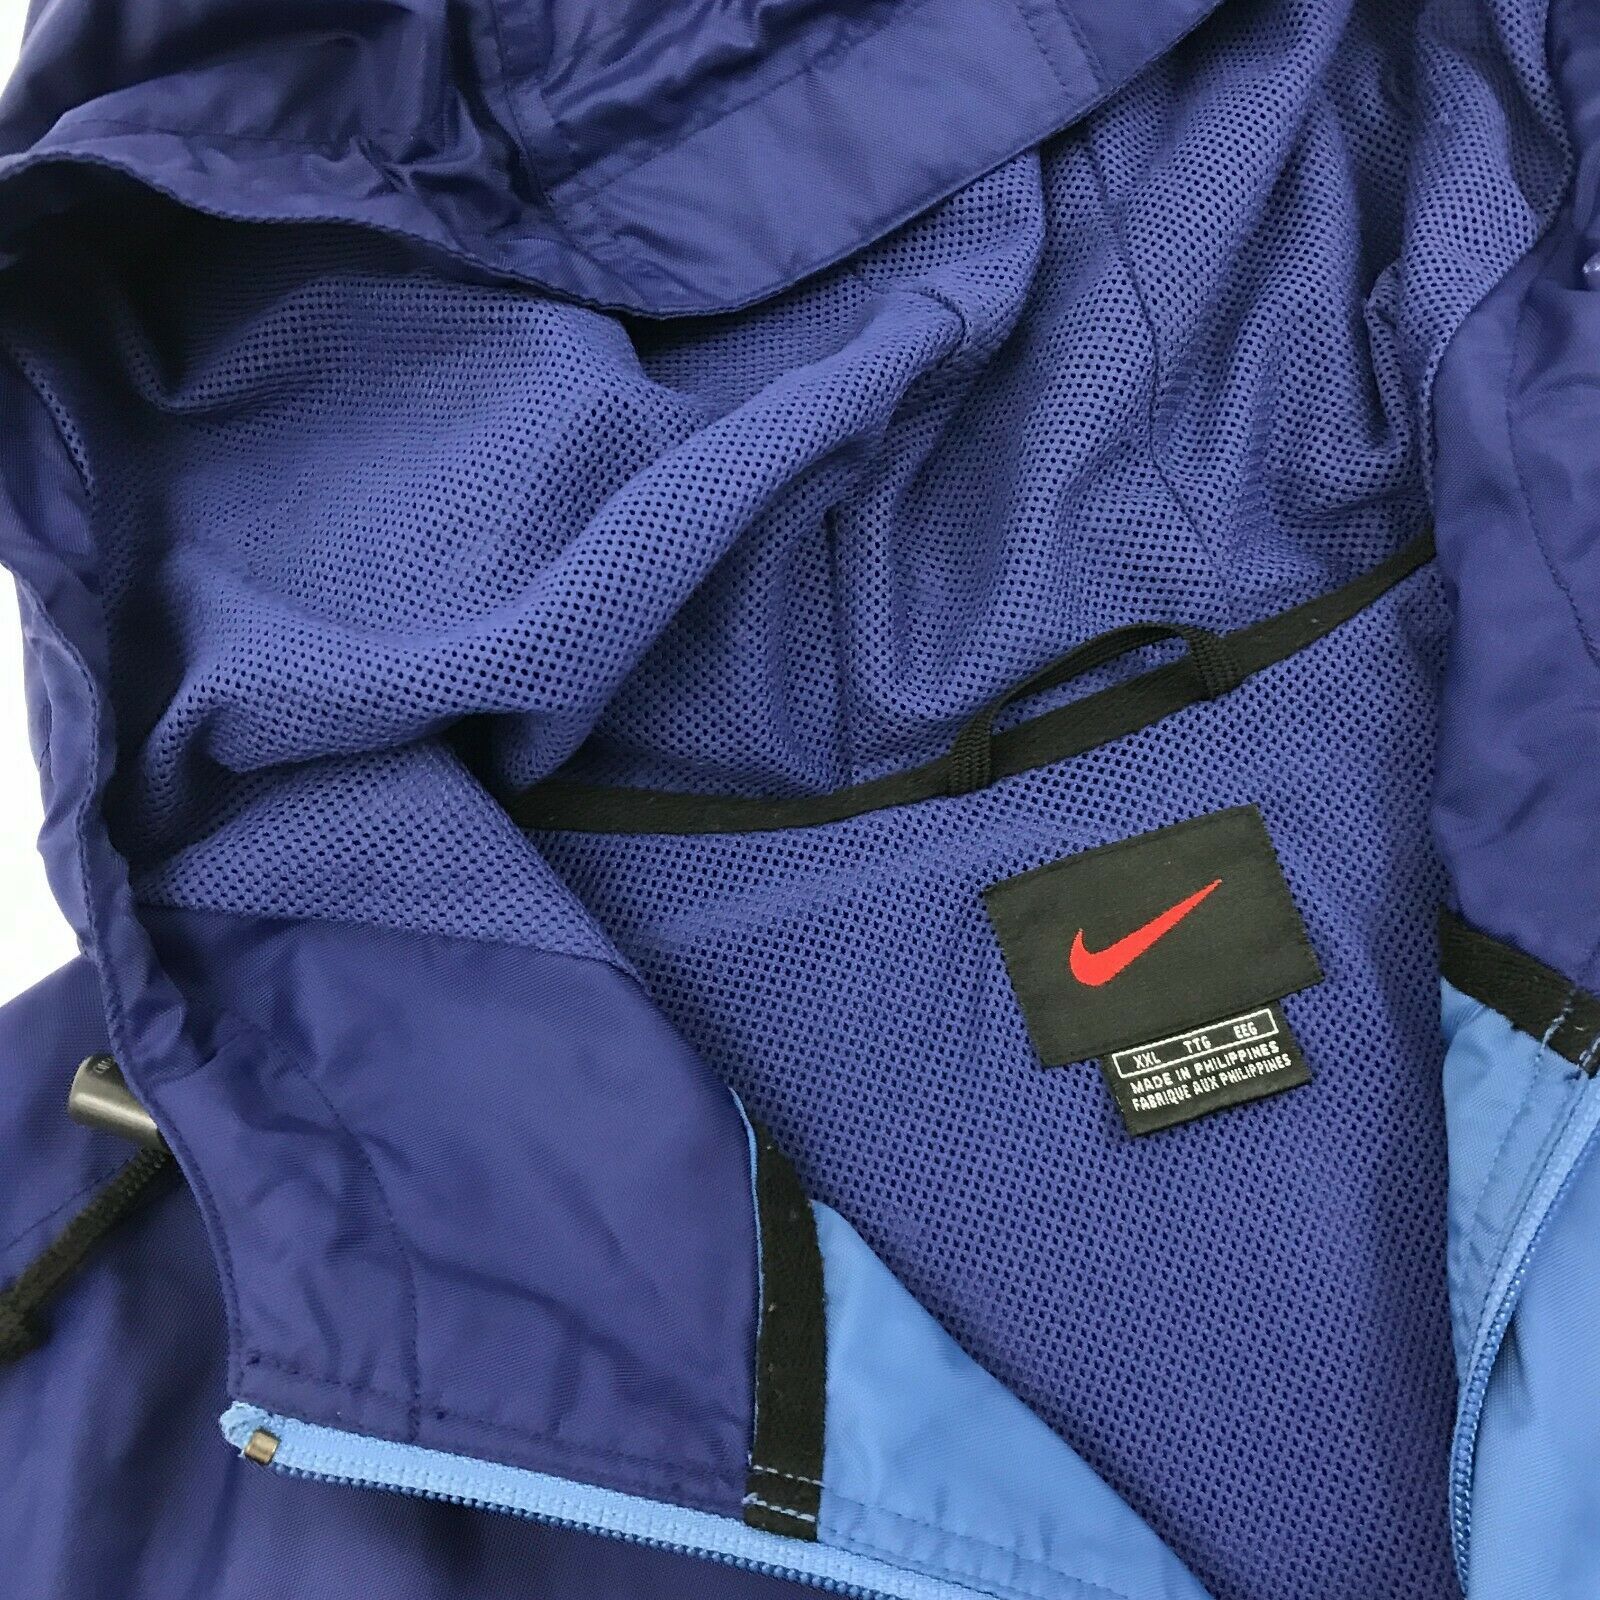 VINTAGE NIKE Soft Shell Jacket Mens Size 2XL 2X Baggy Fit Mesh Lined ...